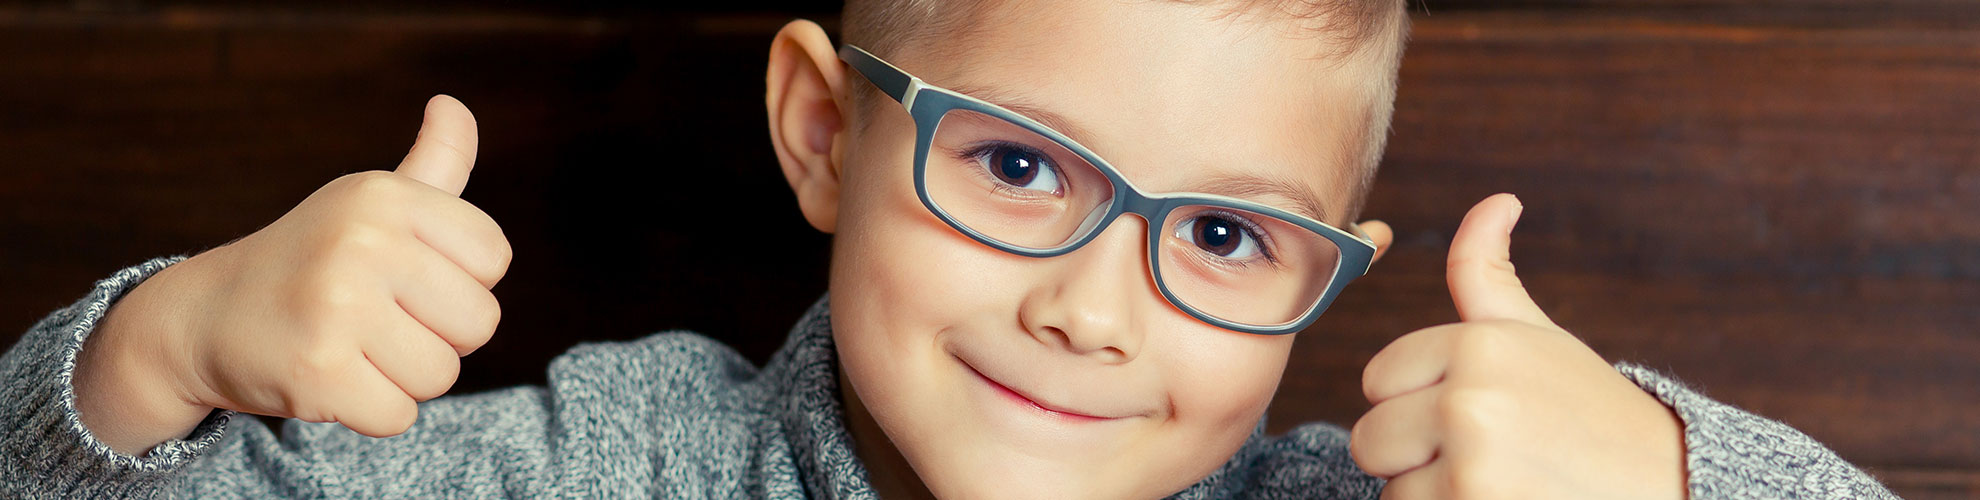 Young boy pediatric thumbs up wearing glasses